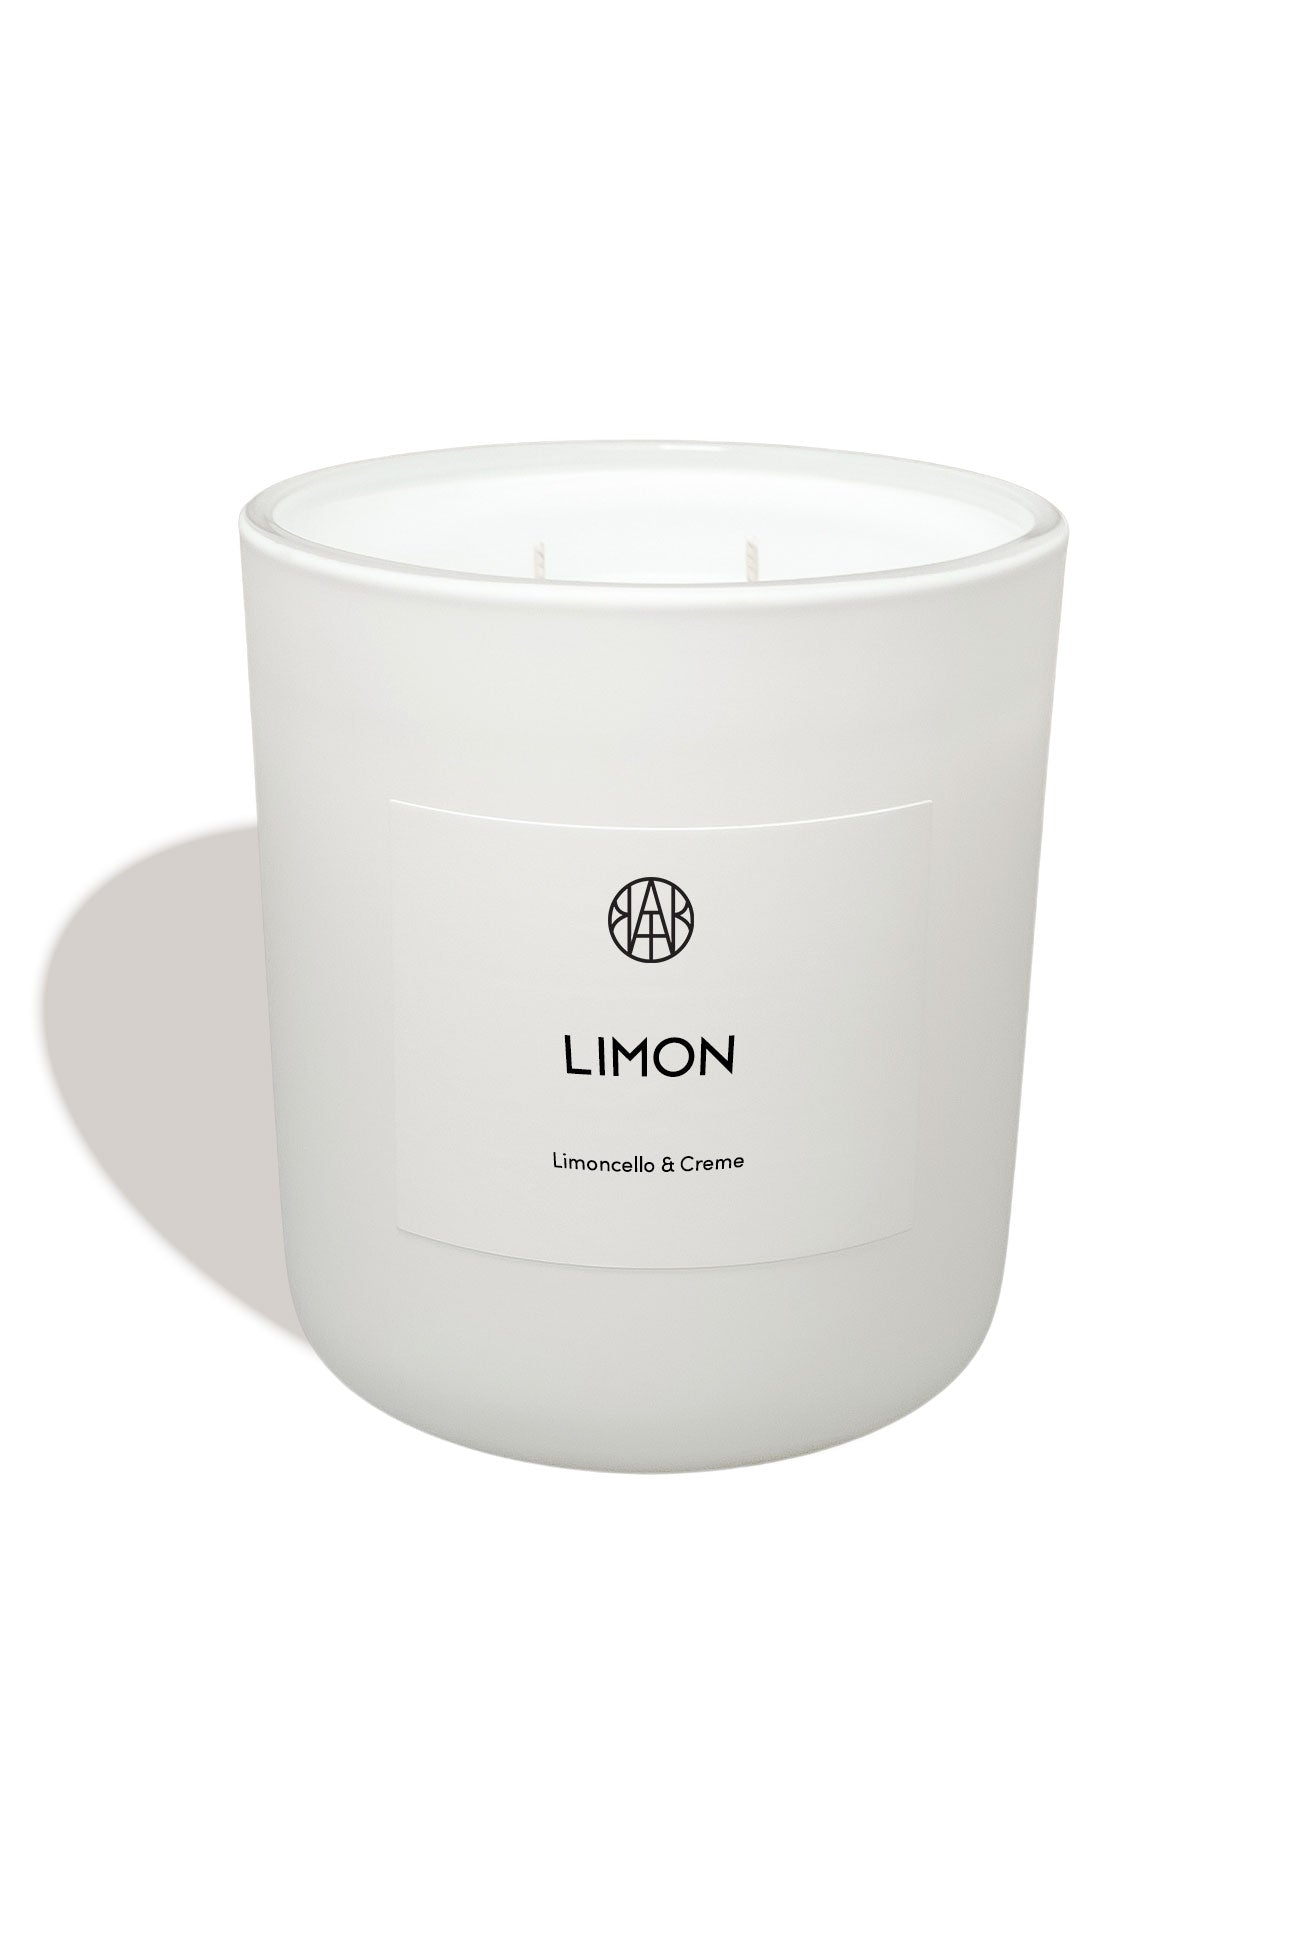 LIMON - Deluxe Candle - AEMBR - Clean Luxury Candles, Wax Melts & Laundry Care